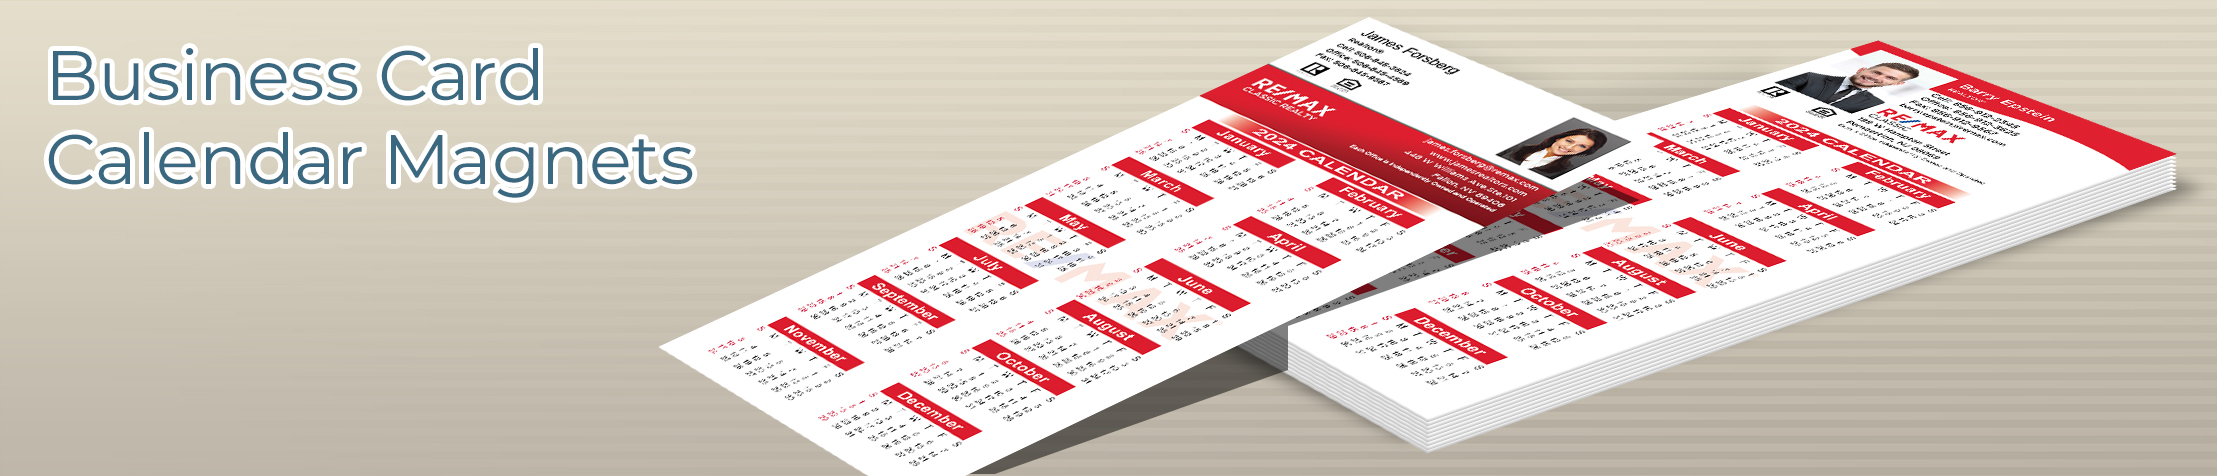 RE/MAX Real Estate Business Card Calendar Magnets - RE/MAX  2019 calendars with photo and contact info | BestPrintBuy.com